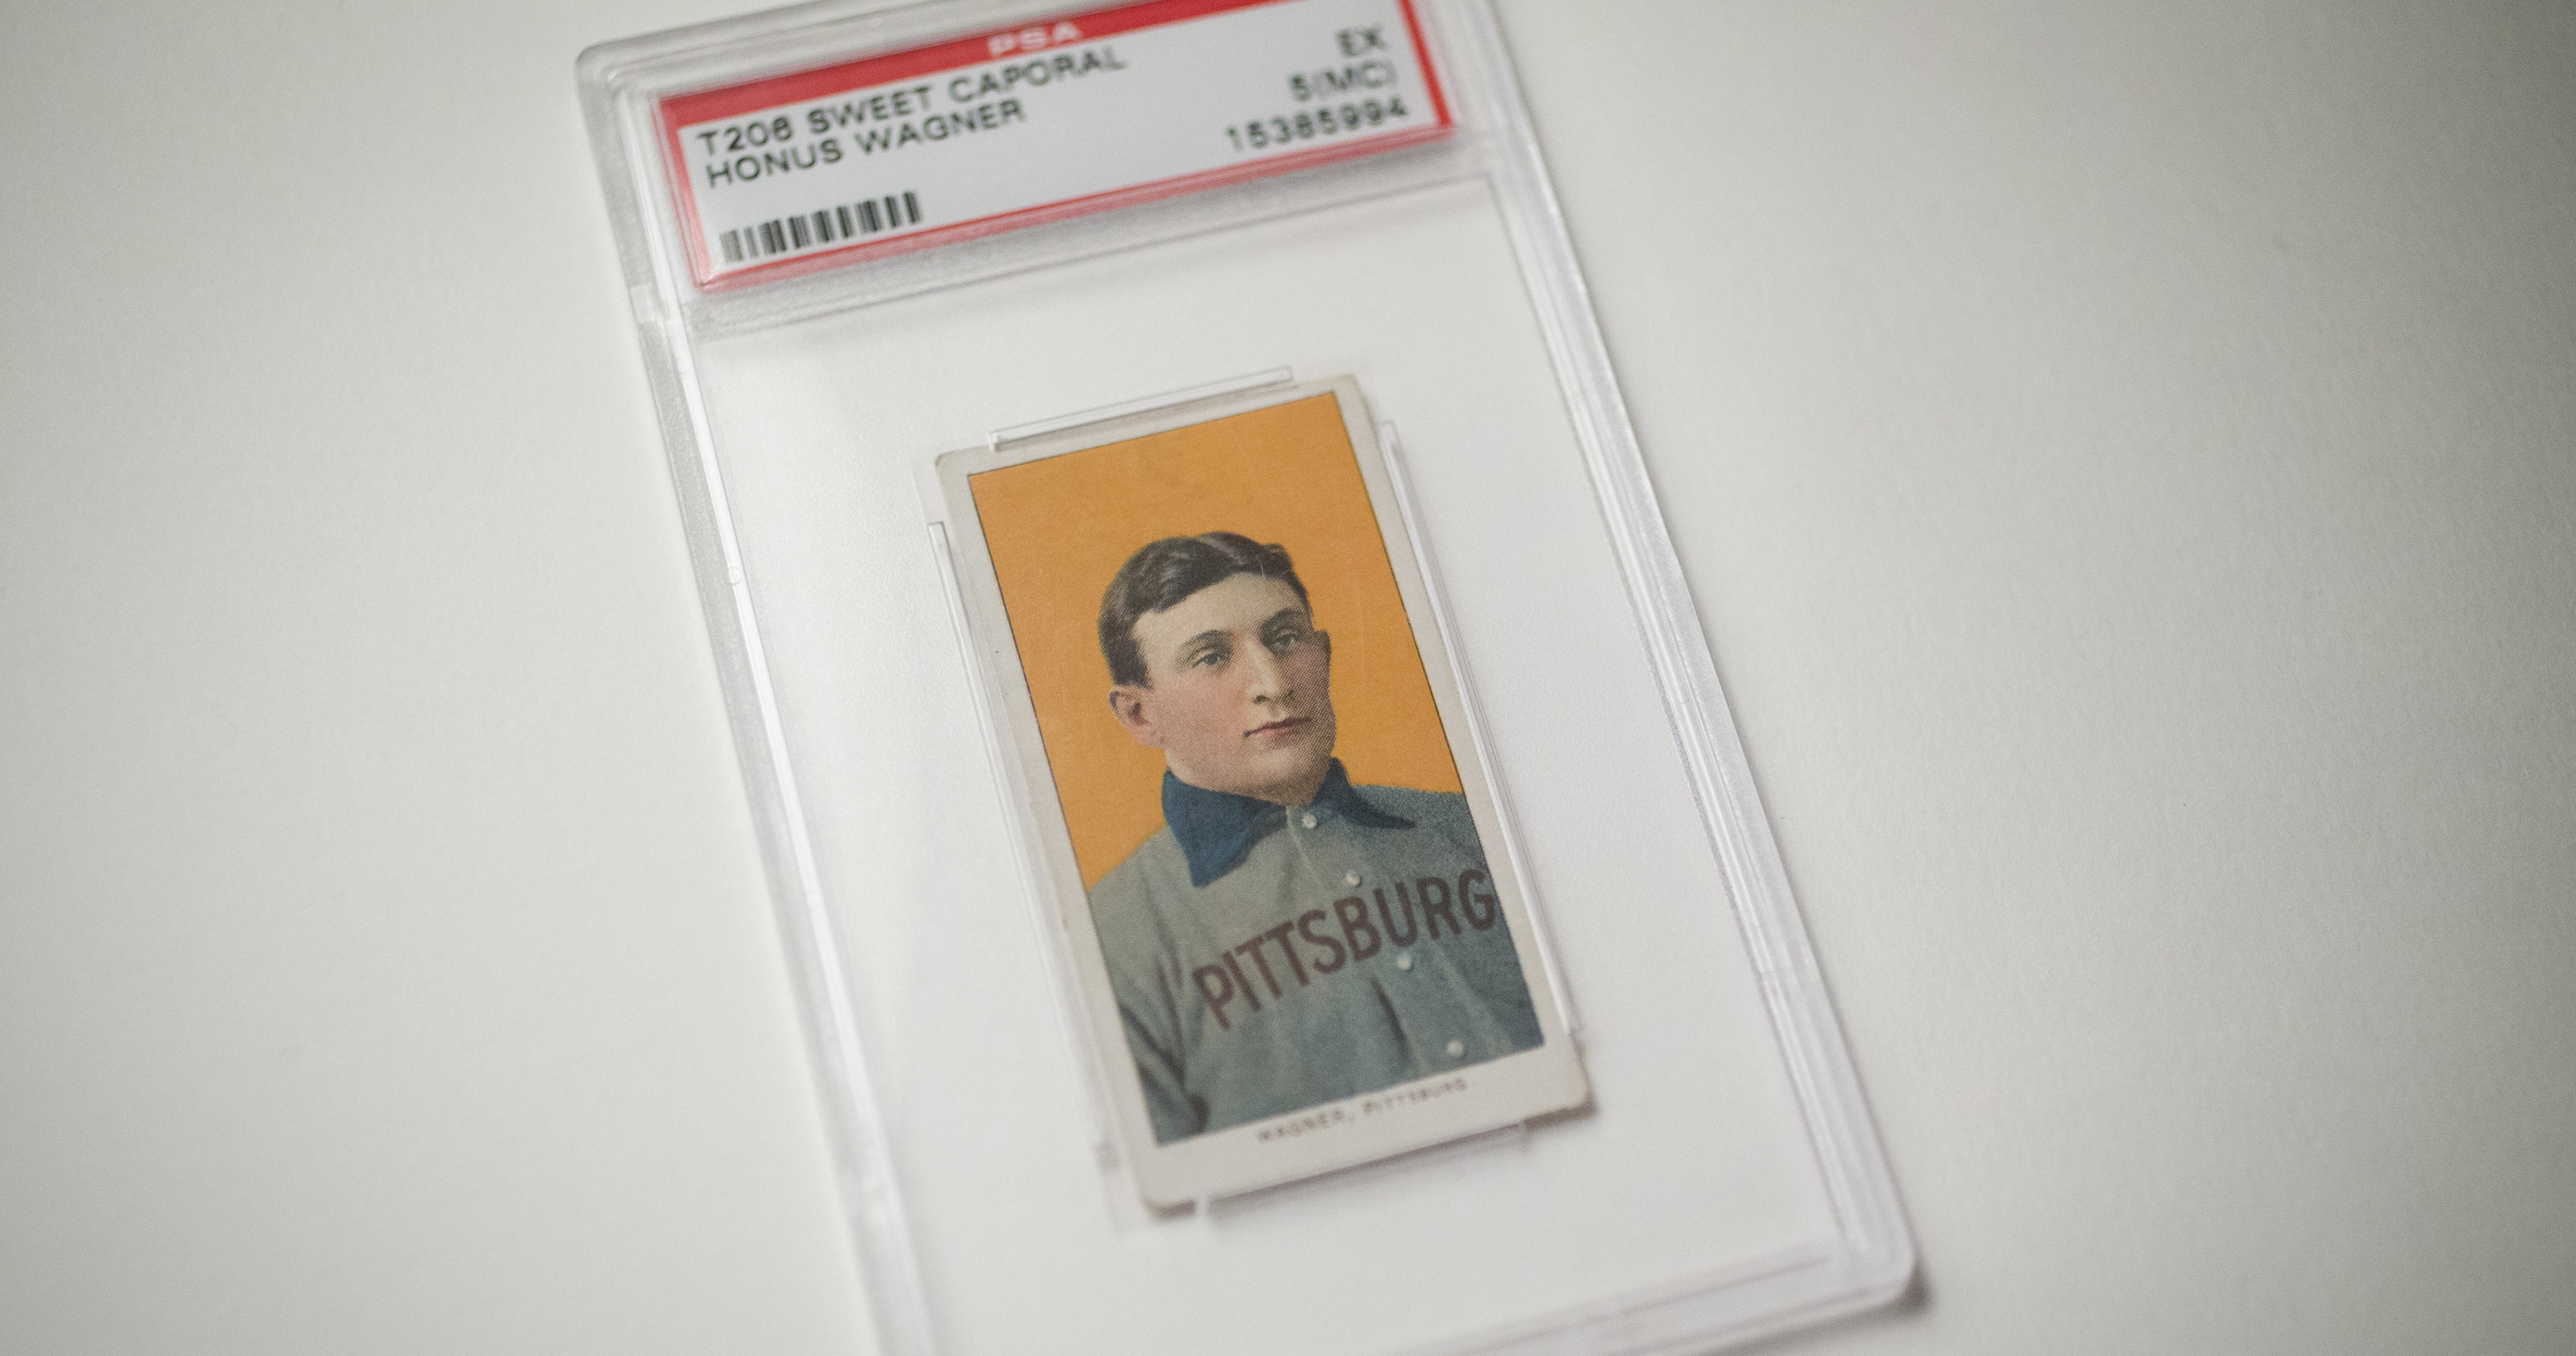 Half of a T206 Honus Wagner card sells for more than $475K in